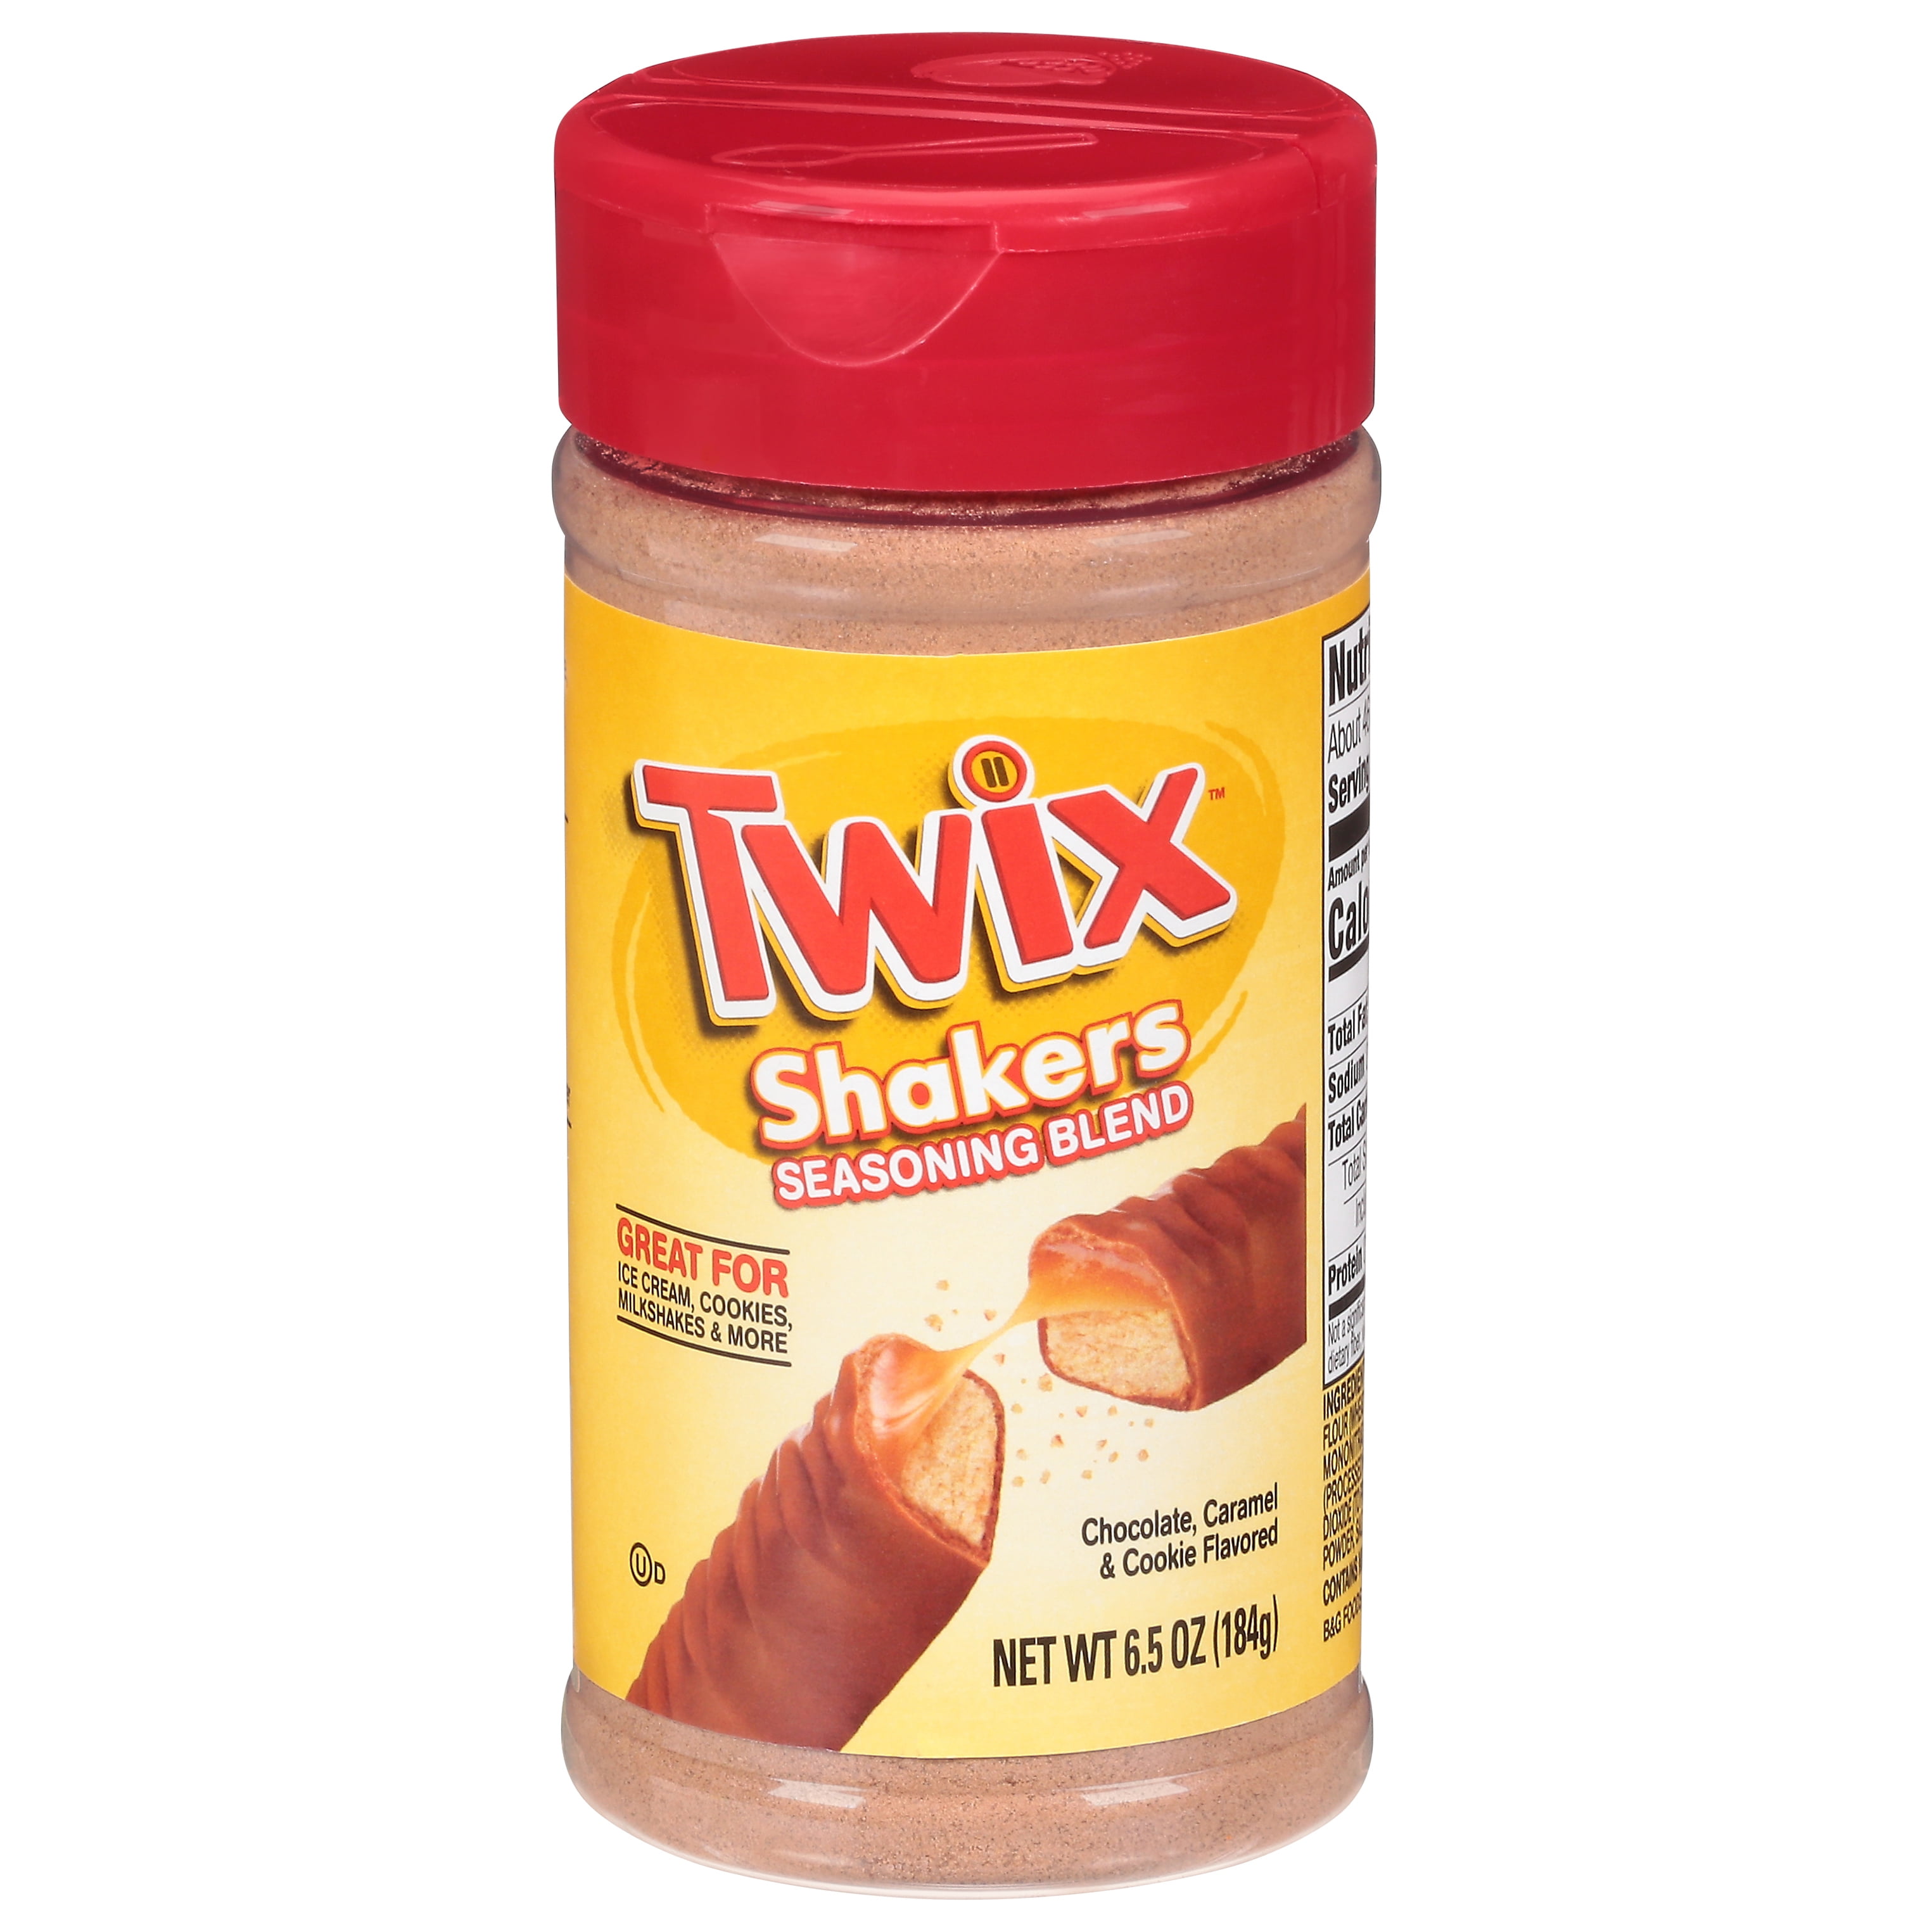 Twix Released 'Twix Shakers' Seasoning Blend That You Can